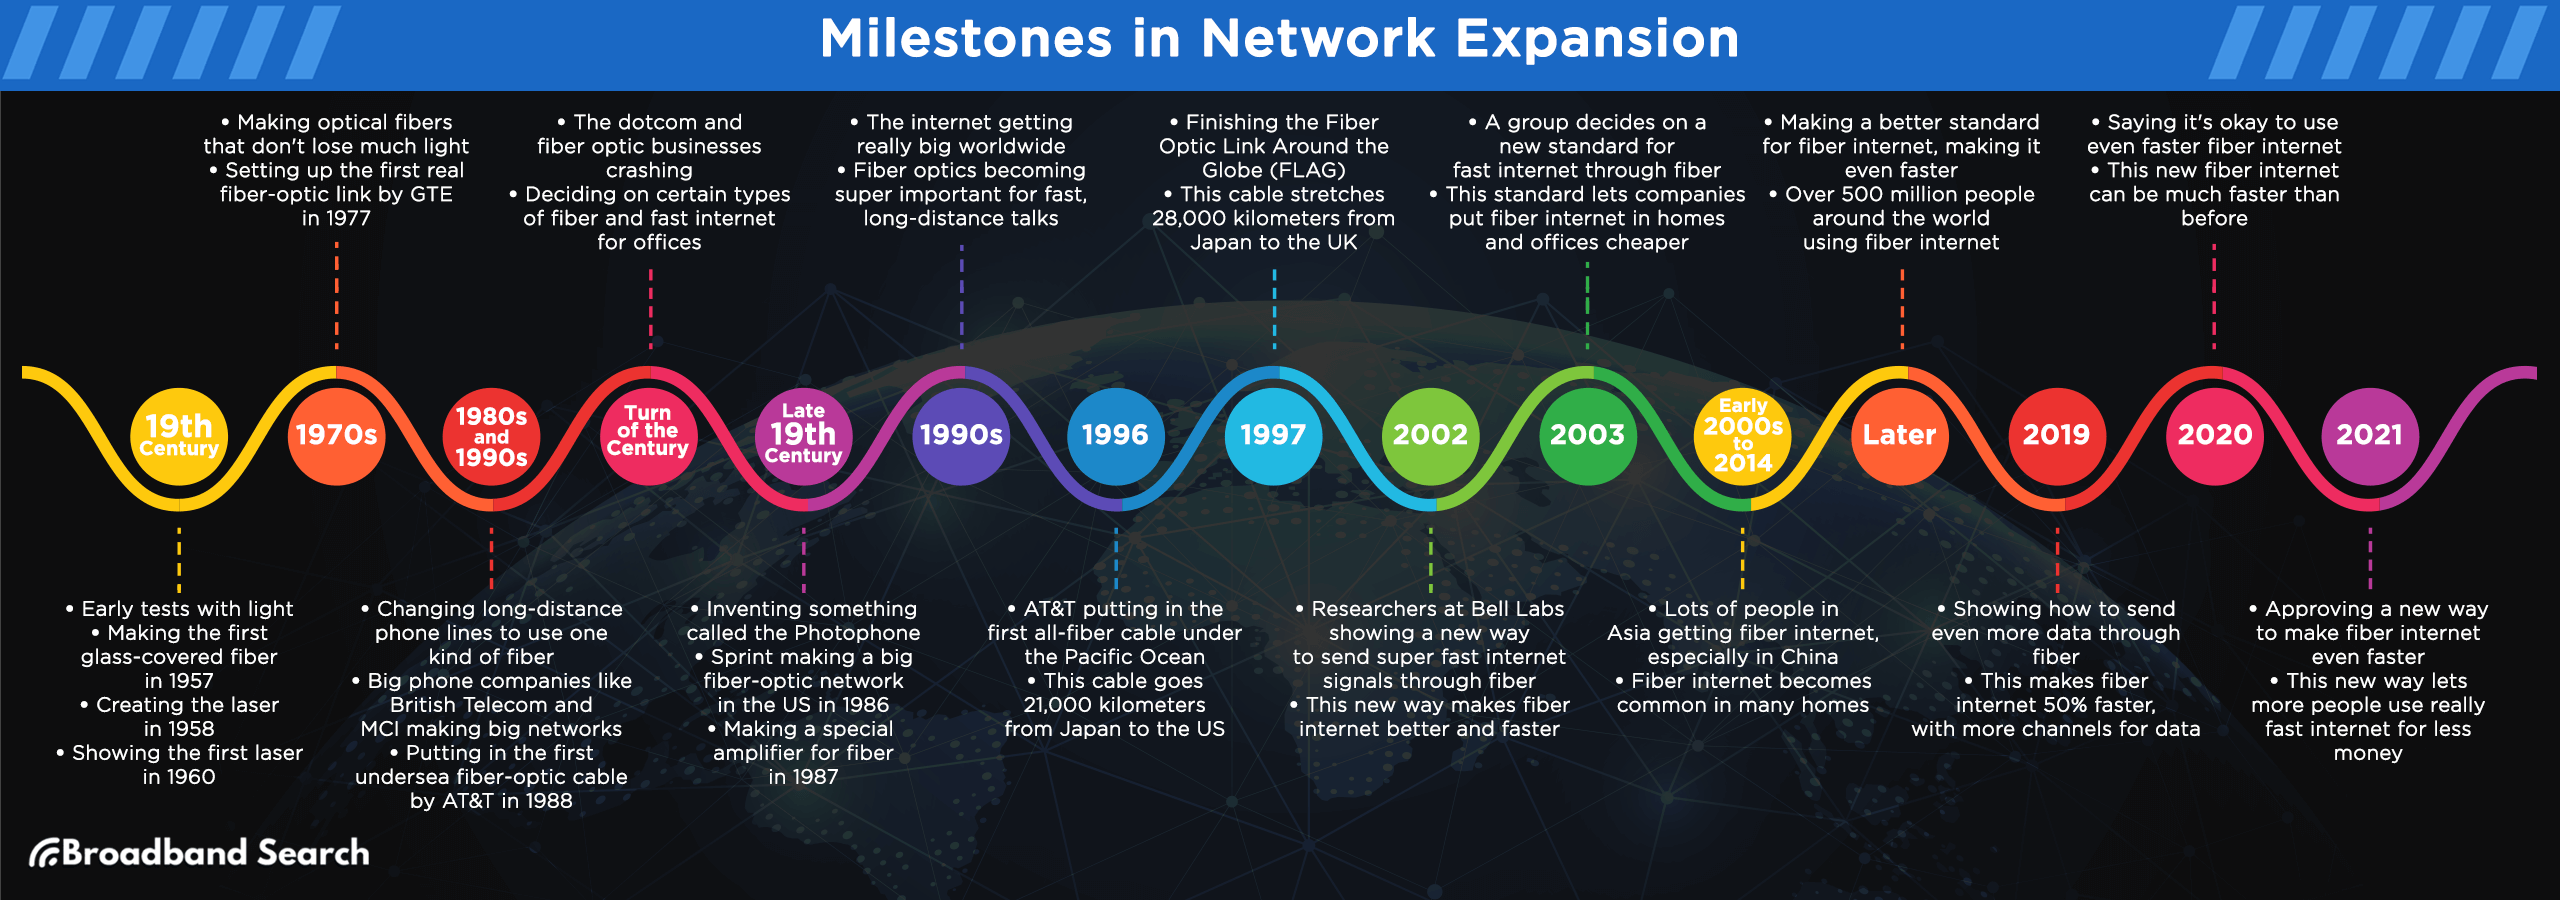 Milestones in Network Expansion